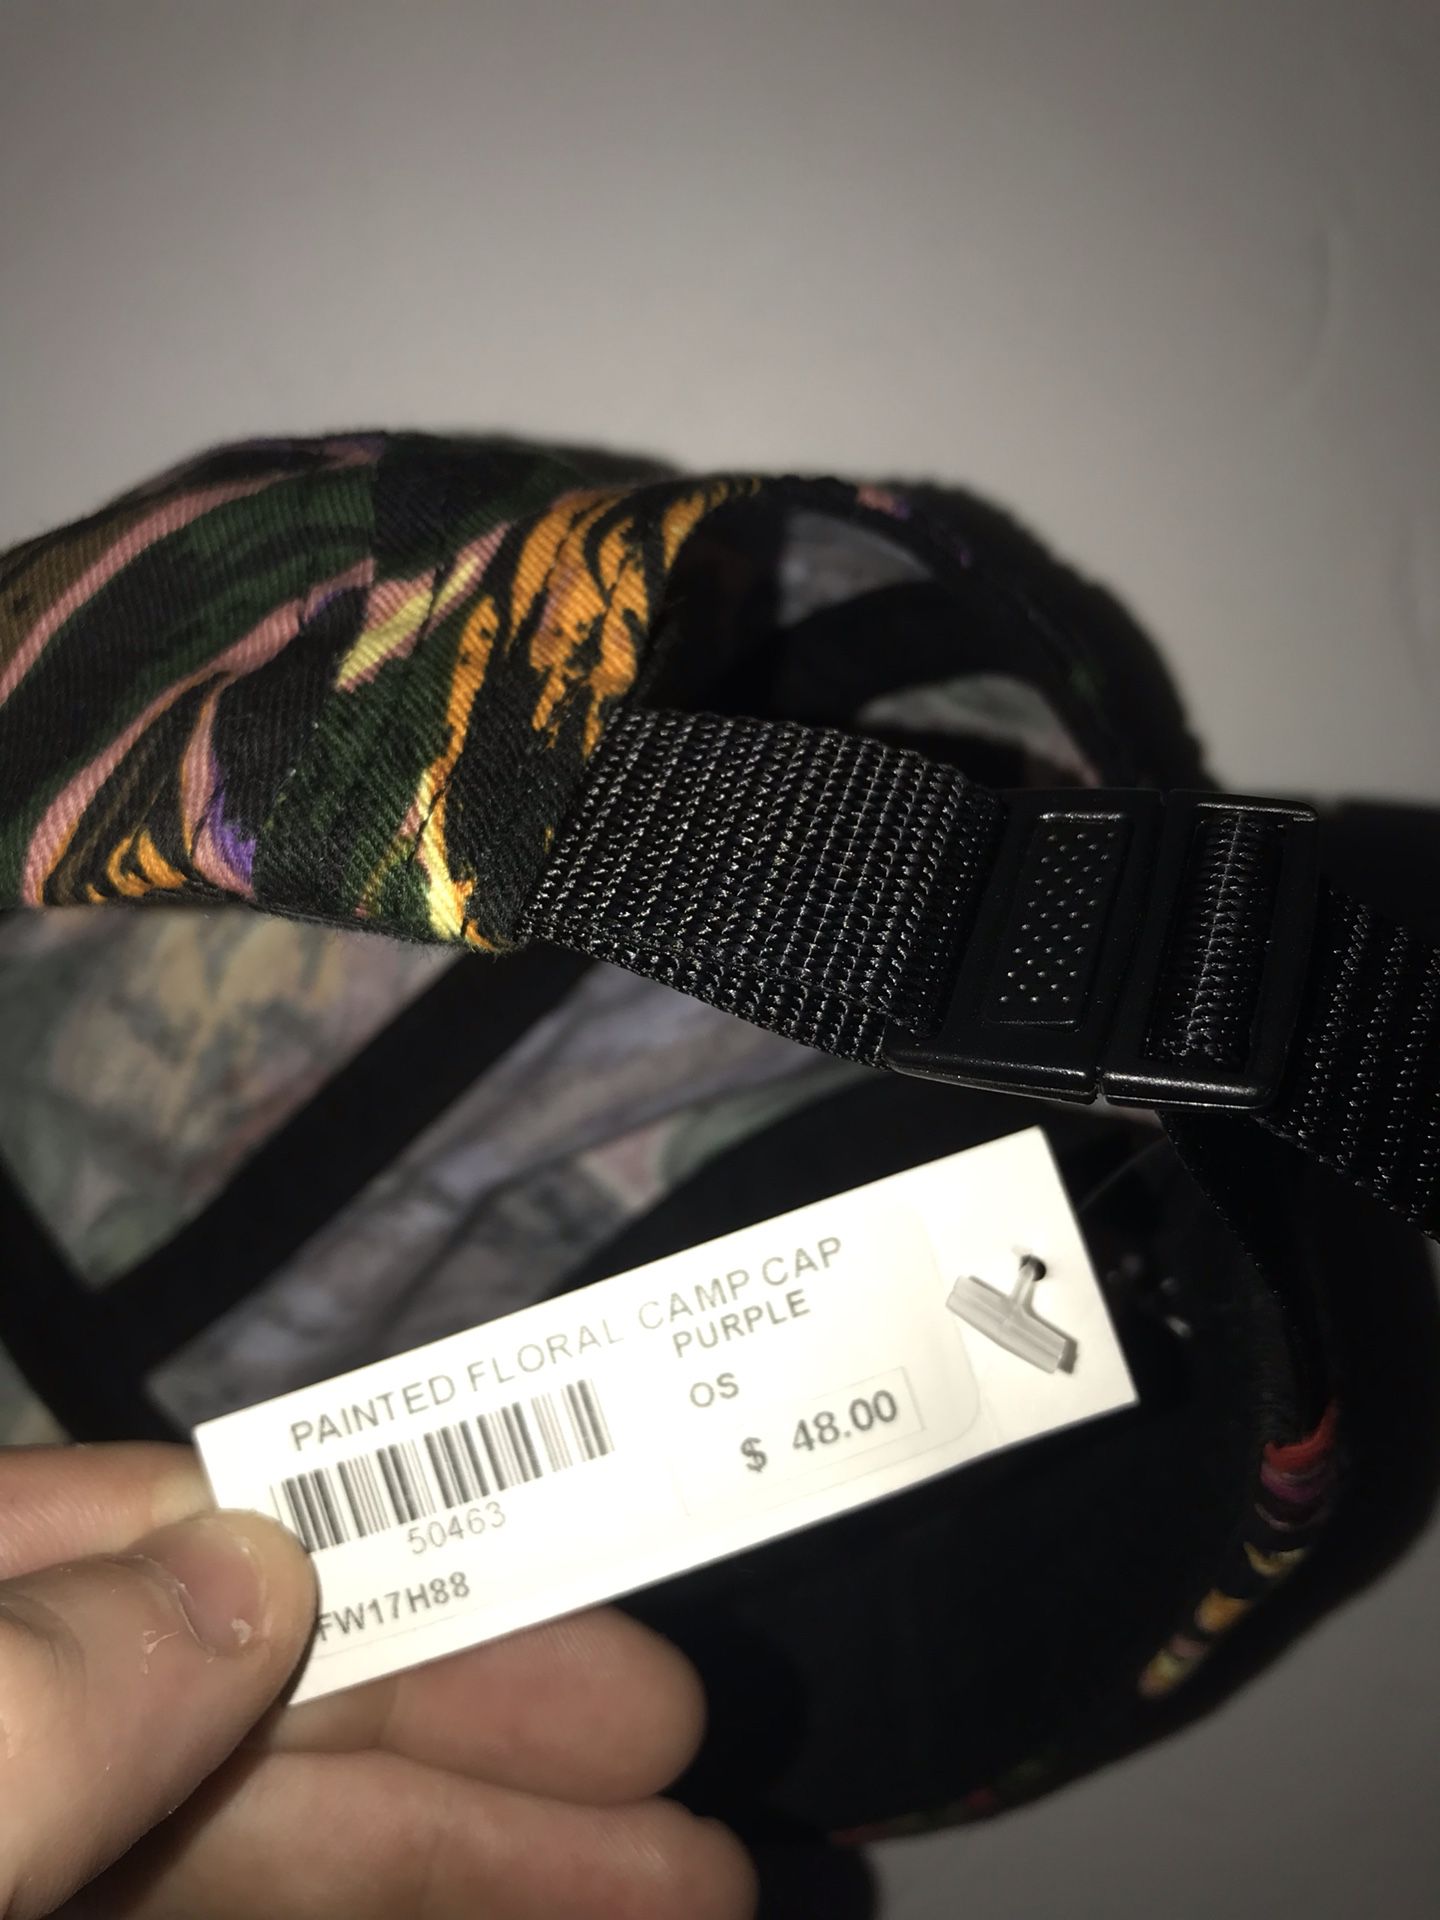 Supreme Floral 5 panel Hat for Sale in Lake Forest, CA   OfferUp